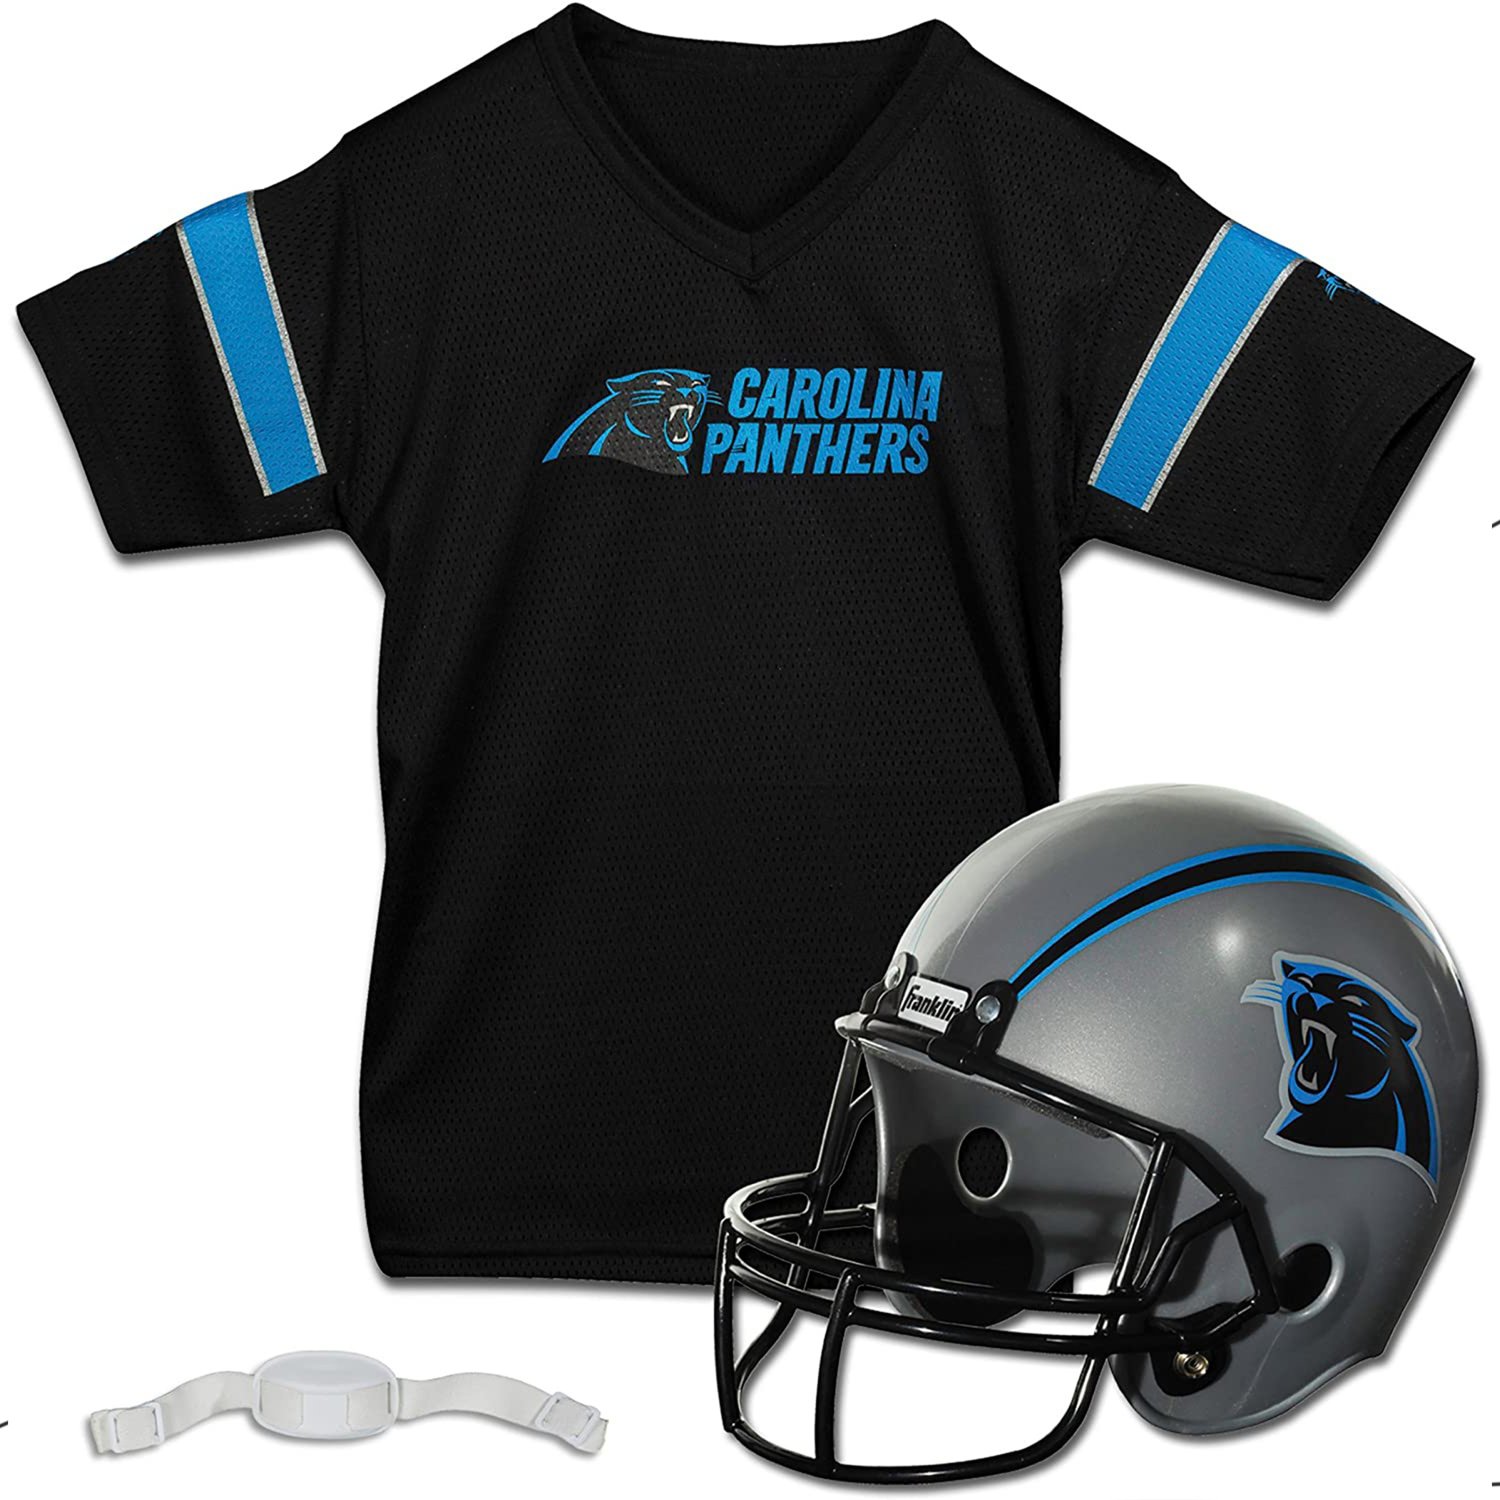 Carolina Panthers Official Shop  Panthers Jerseys, Apparel and Gear at the  Online Panthers Store